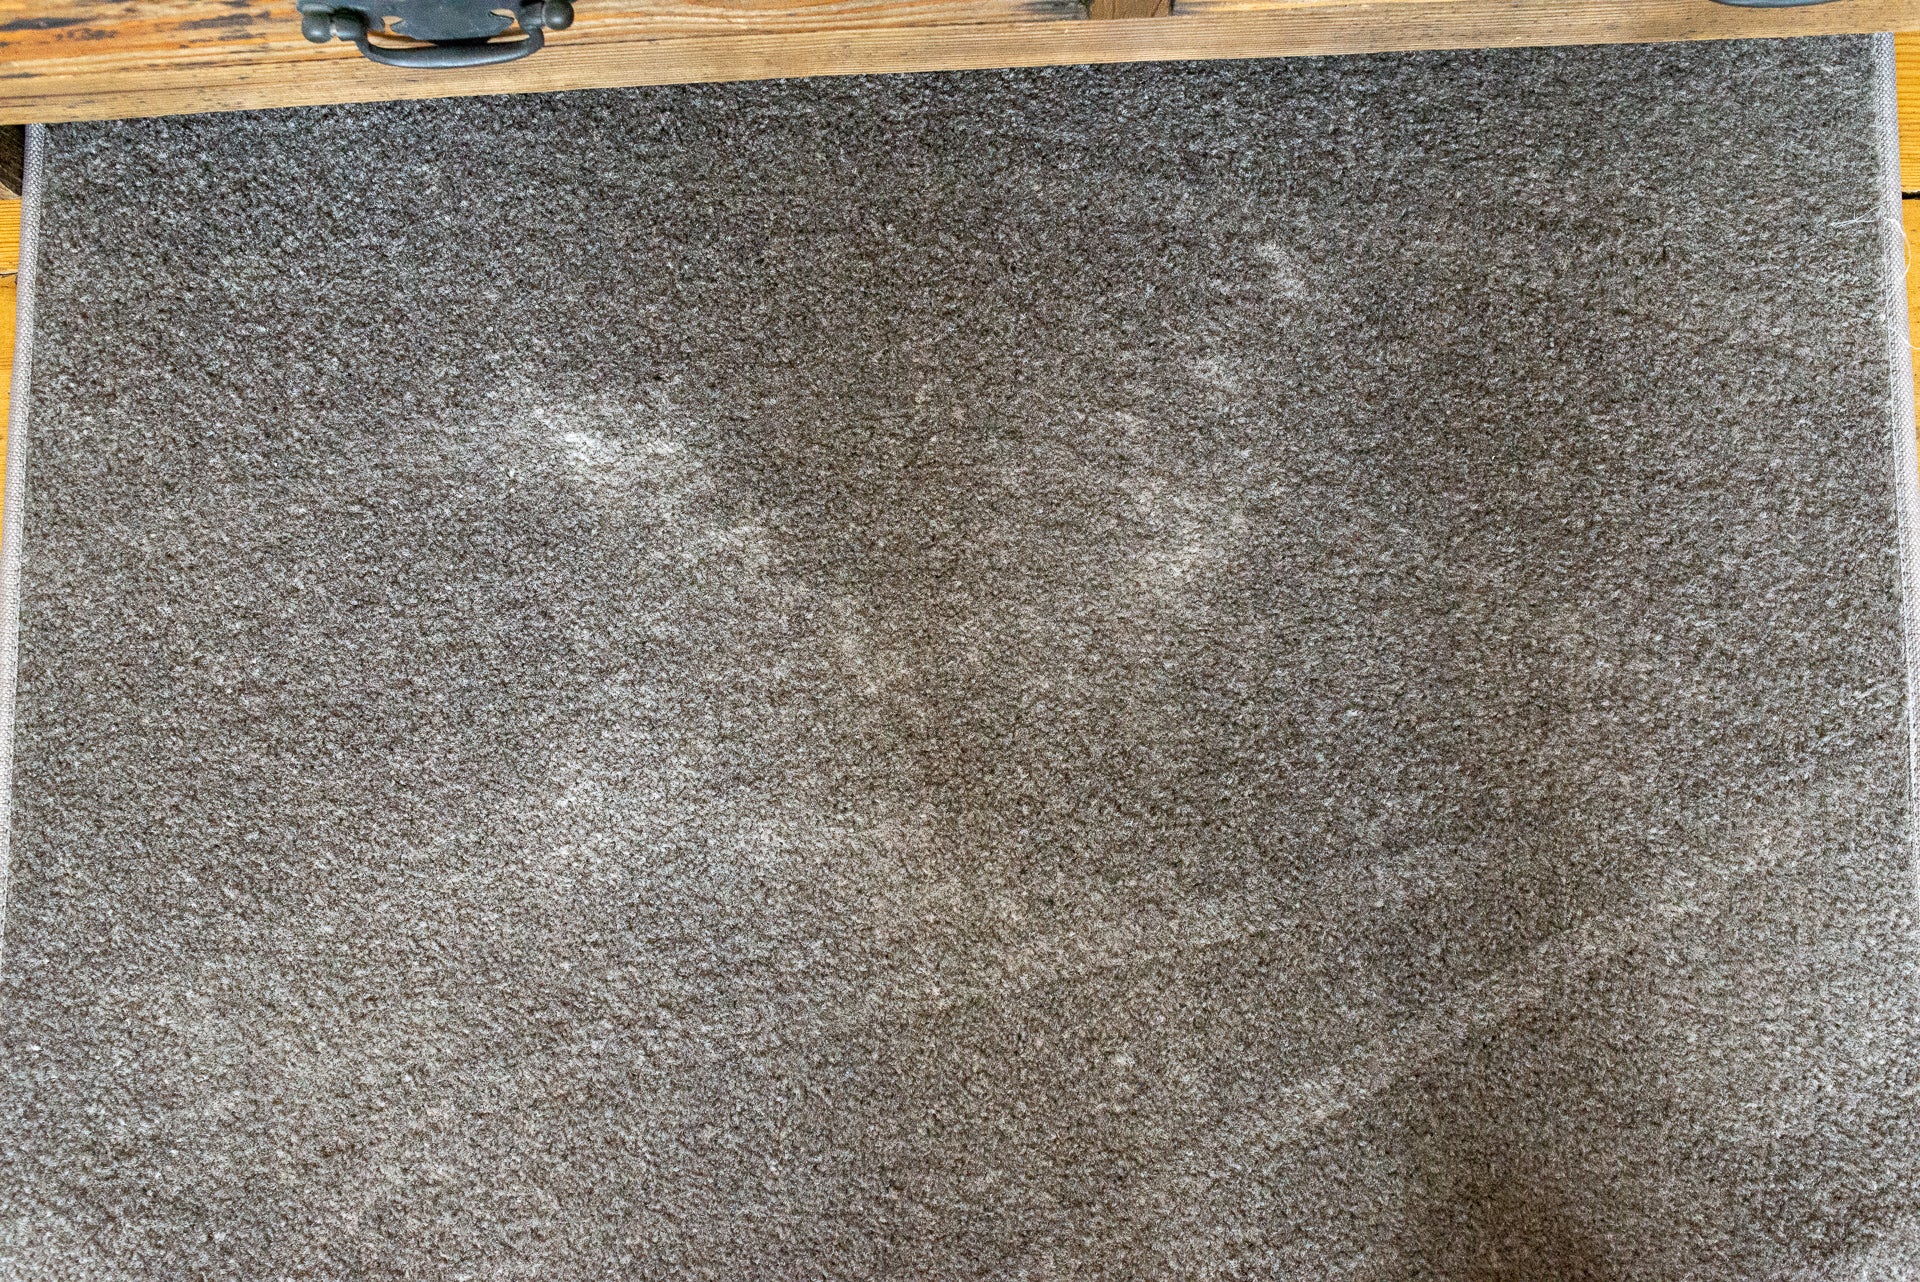 Carpet with clean and dirty areas showing vacuum cleaner's effectiveness